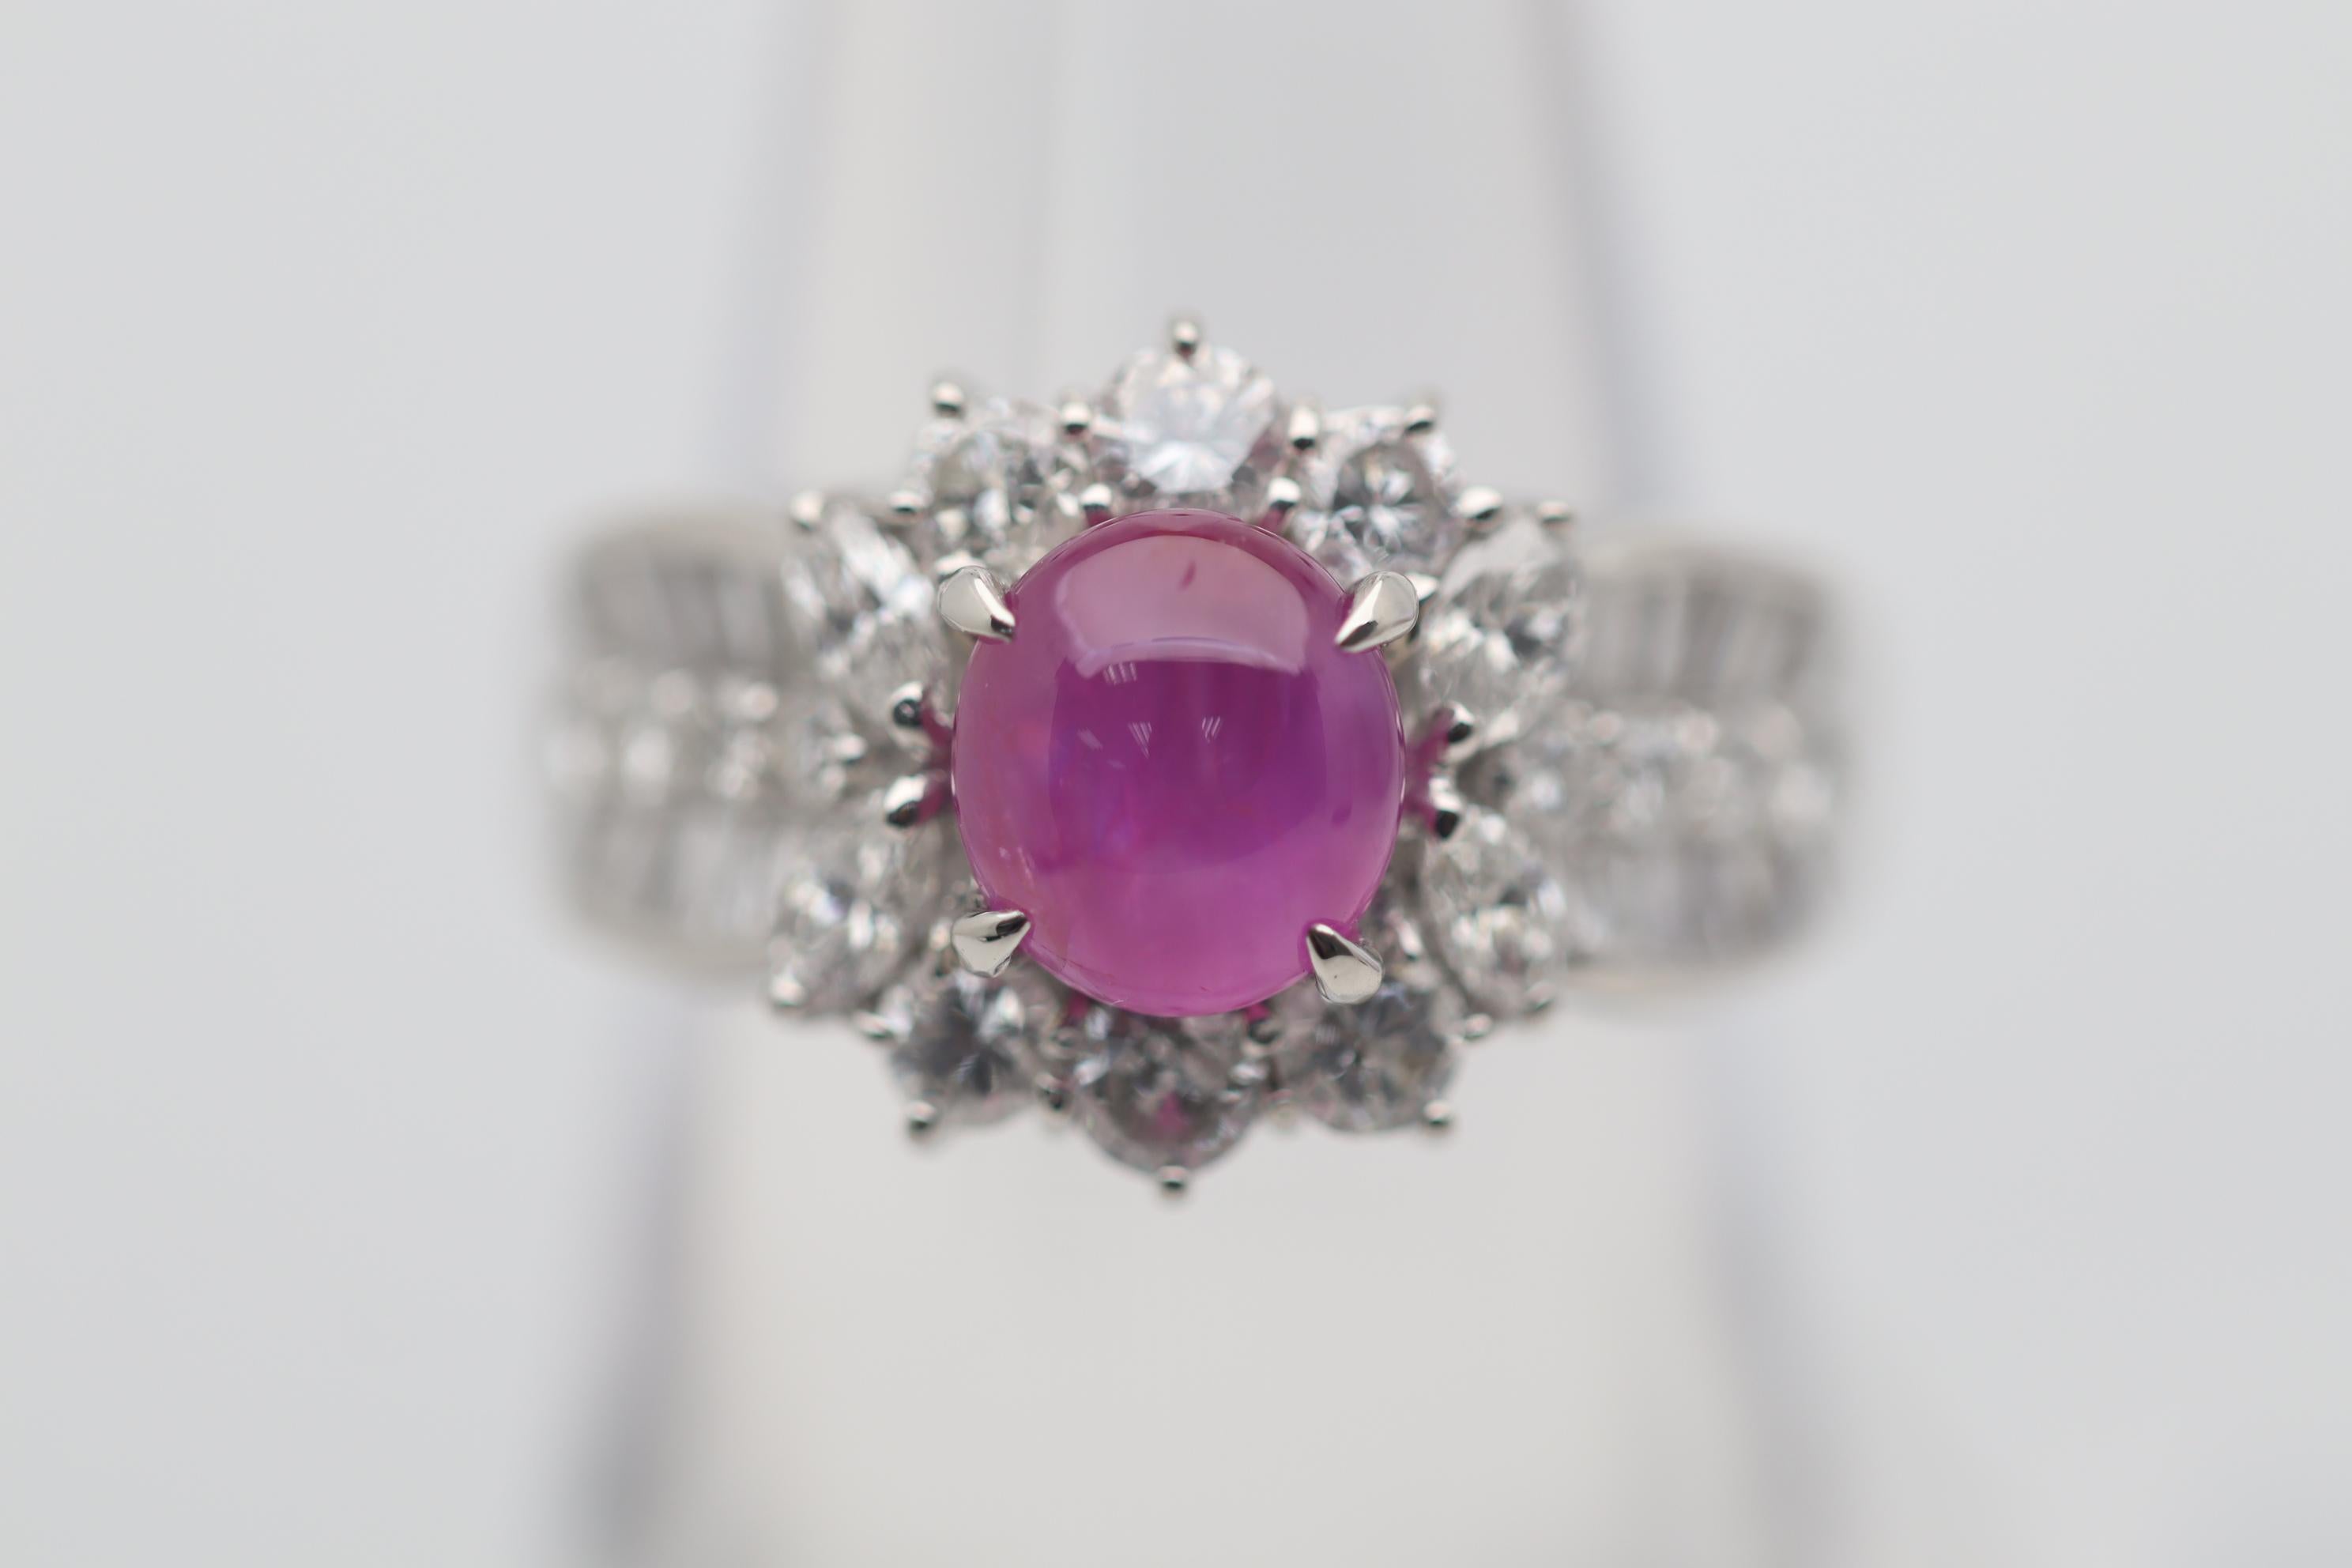 A fine and stylish ring featuring a 2.52 carat gem star ruby. It has a rich and bright red color with excellent luster and a strong 6-rayed star. It is complemented by 1.46 carats of round brilliant, marquise, and baguette-cut diamonds set around